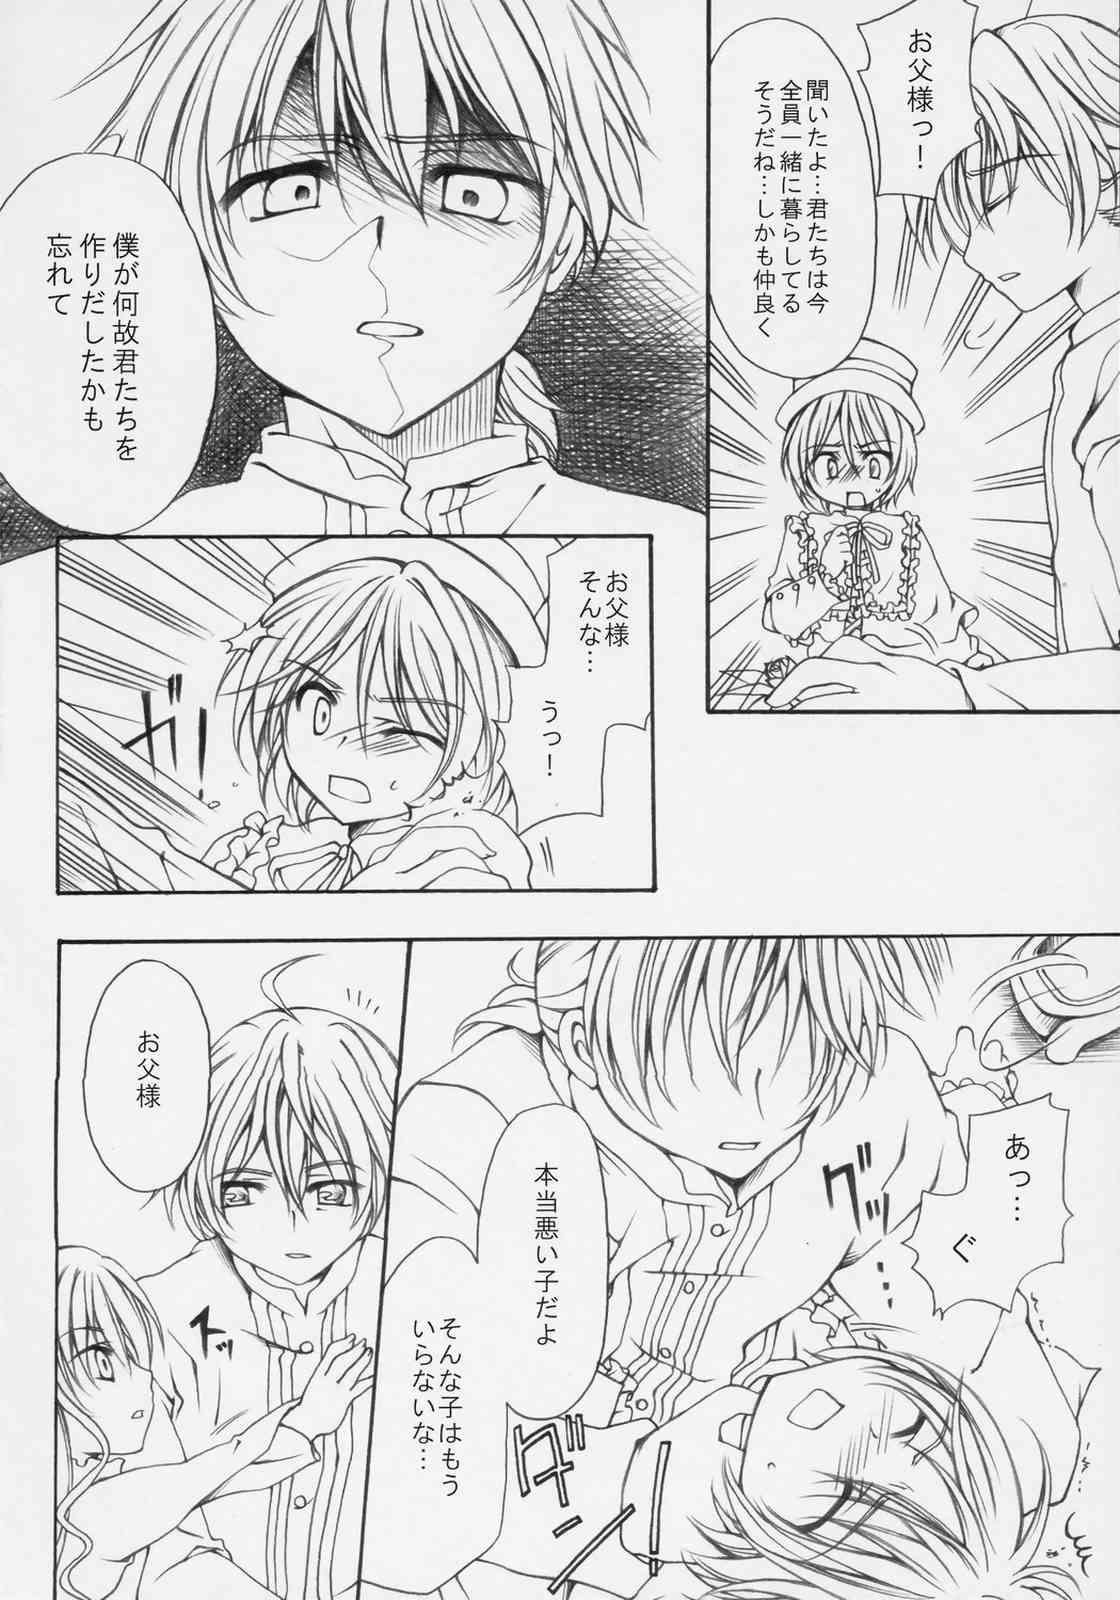 Cheating DANCING DOLL - Rozen maiden Spreading - Page 5